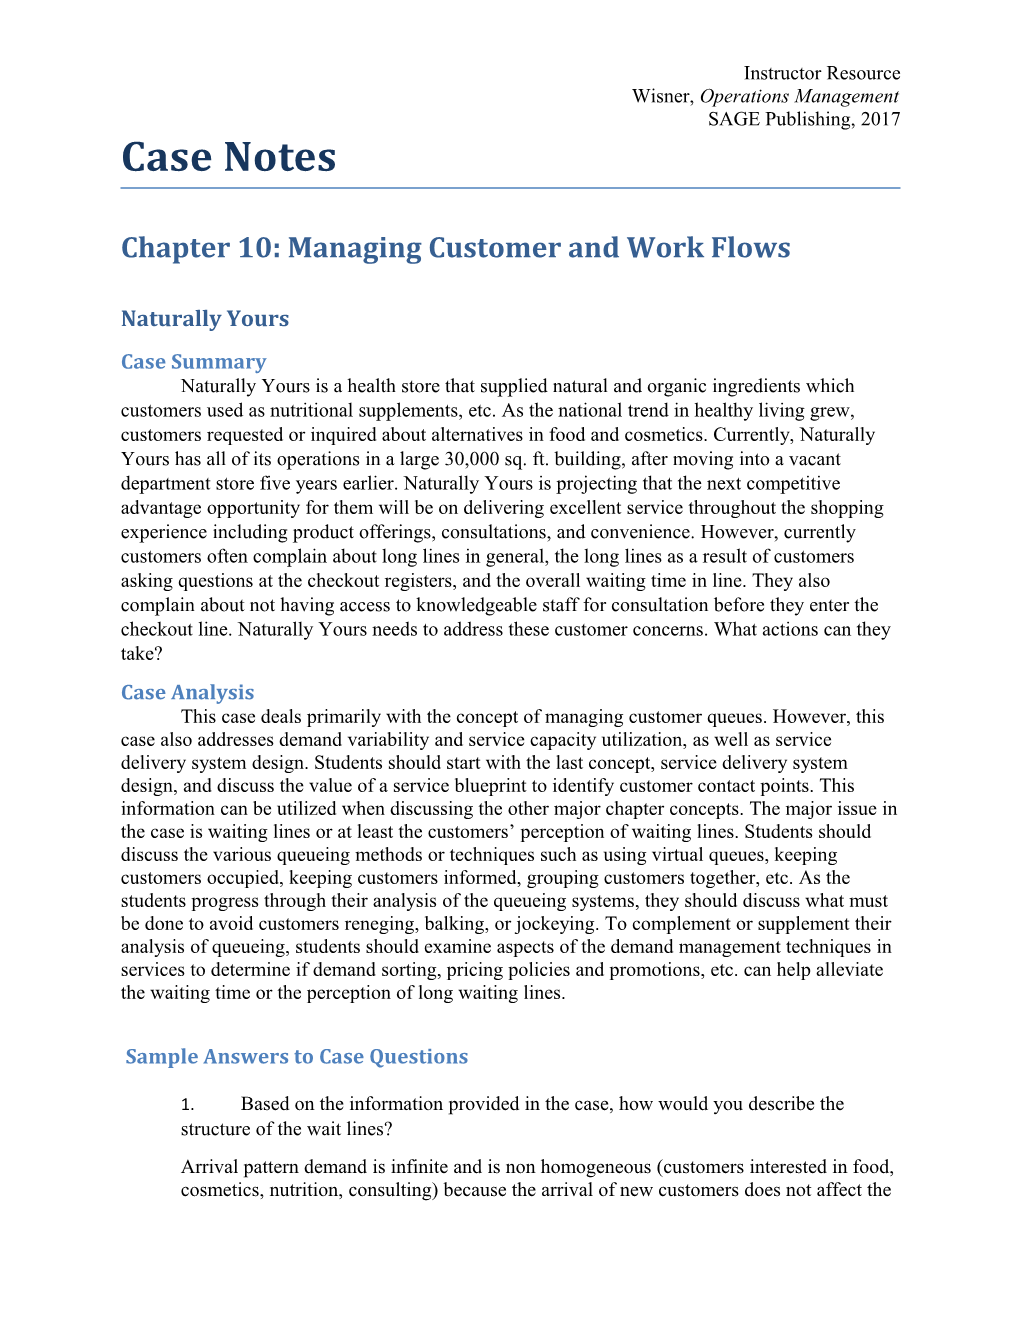 Chapter 10: Managing Customer and Work Flows